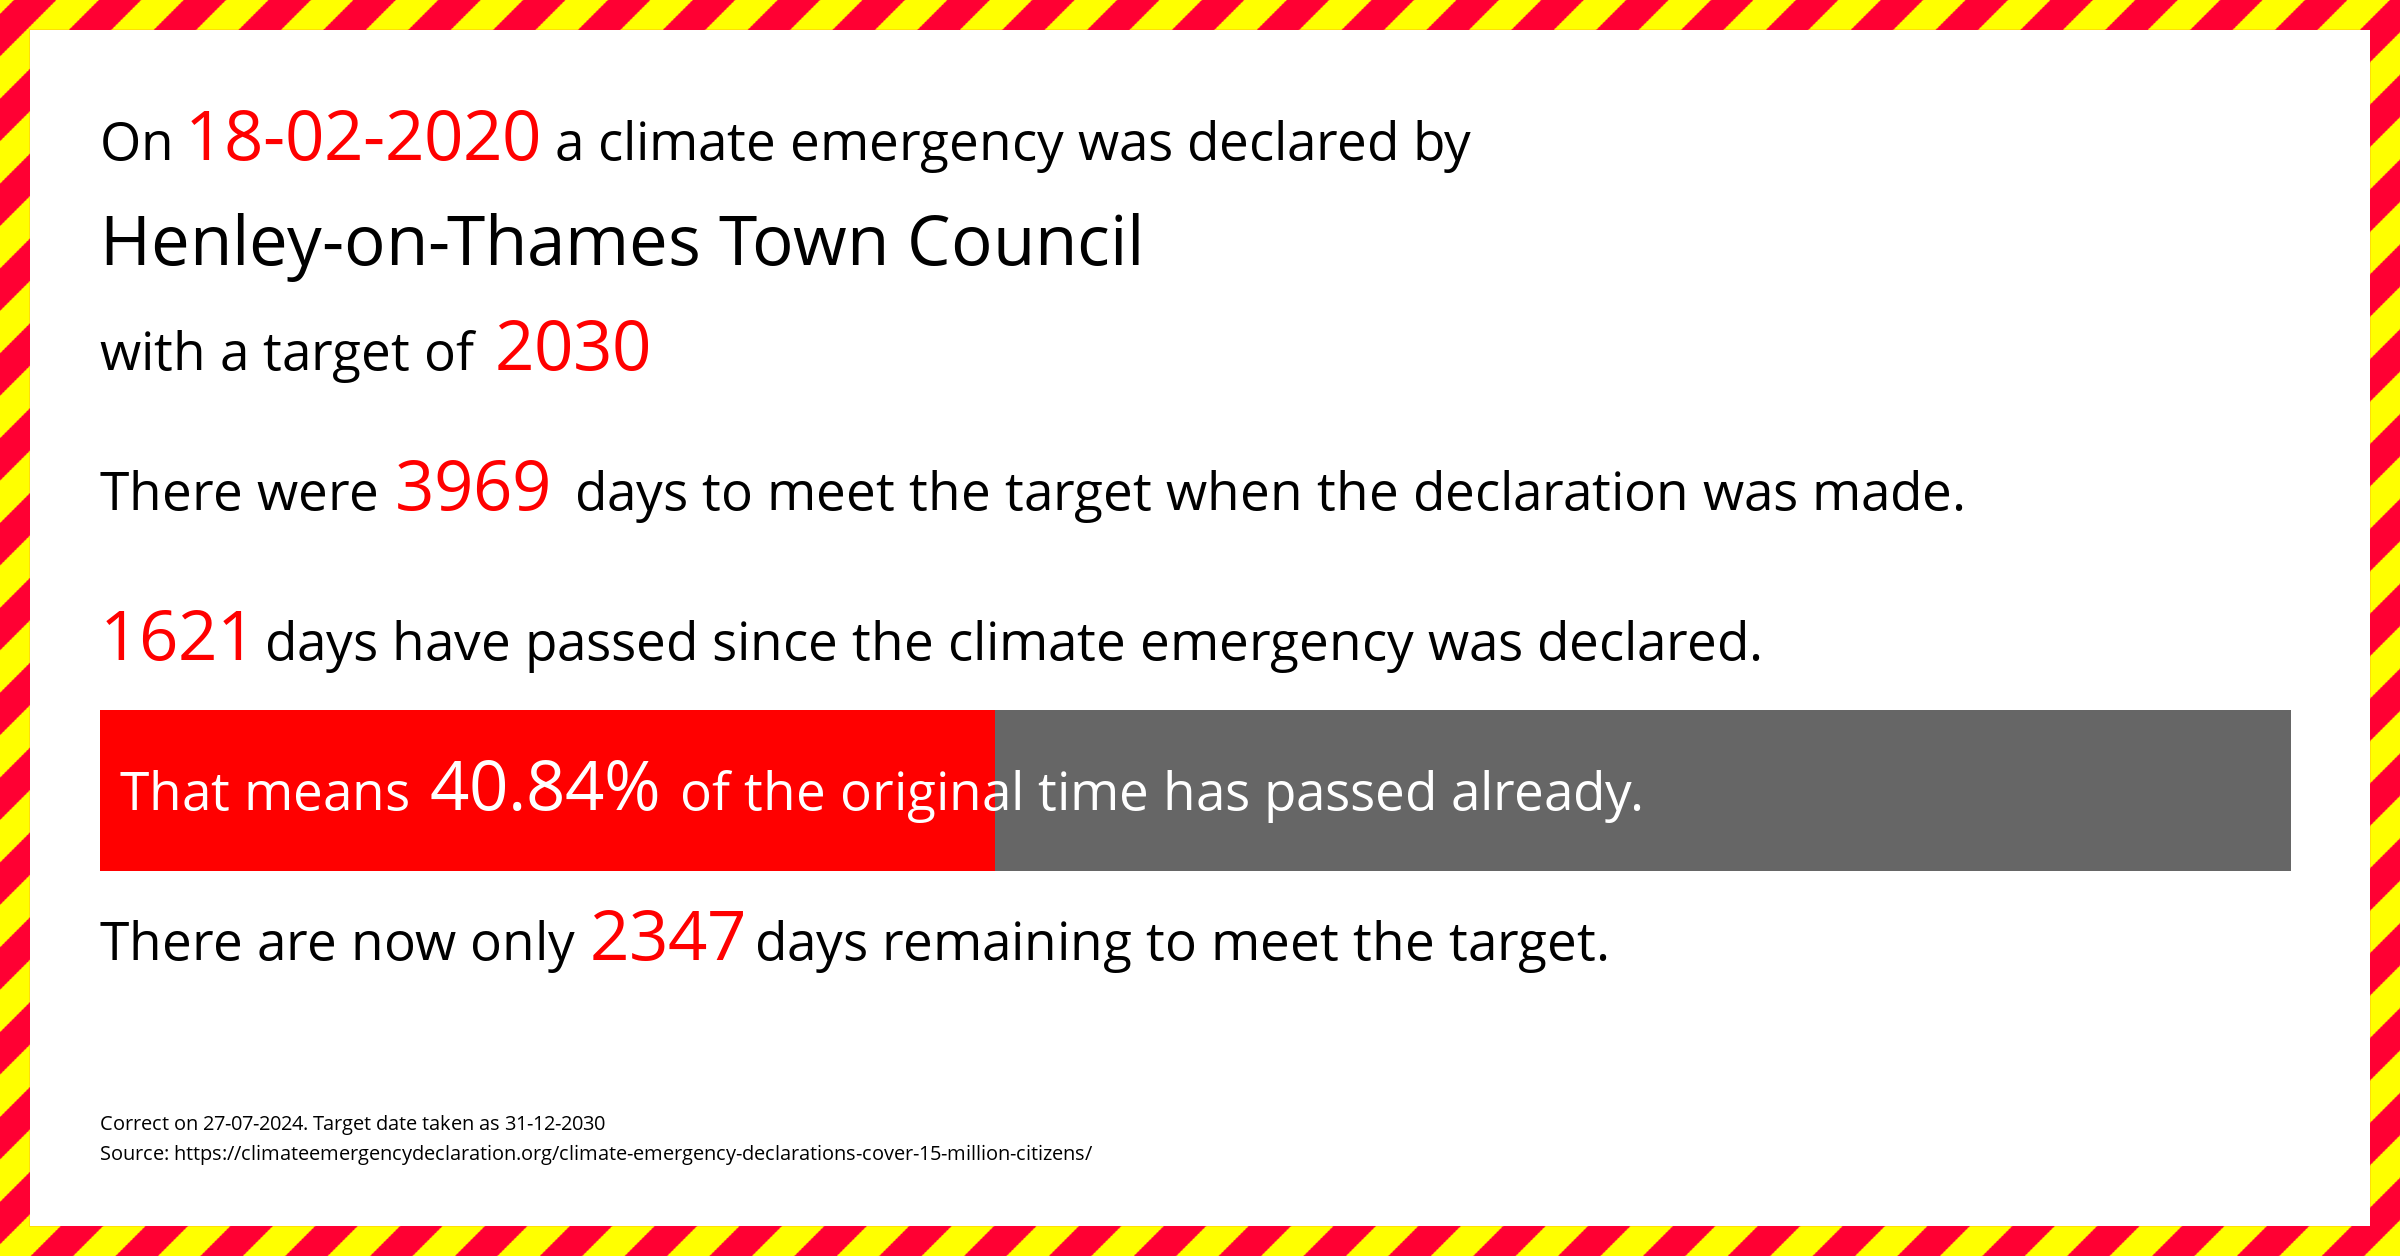 Henley-on-Thames Town Council declared a Climate emergency on Tuesday 18th February 2020, with a target of 2030.